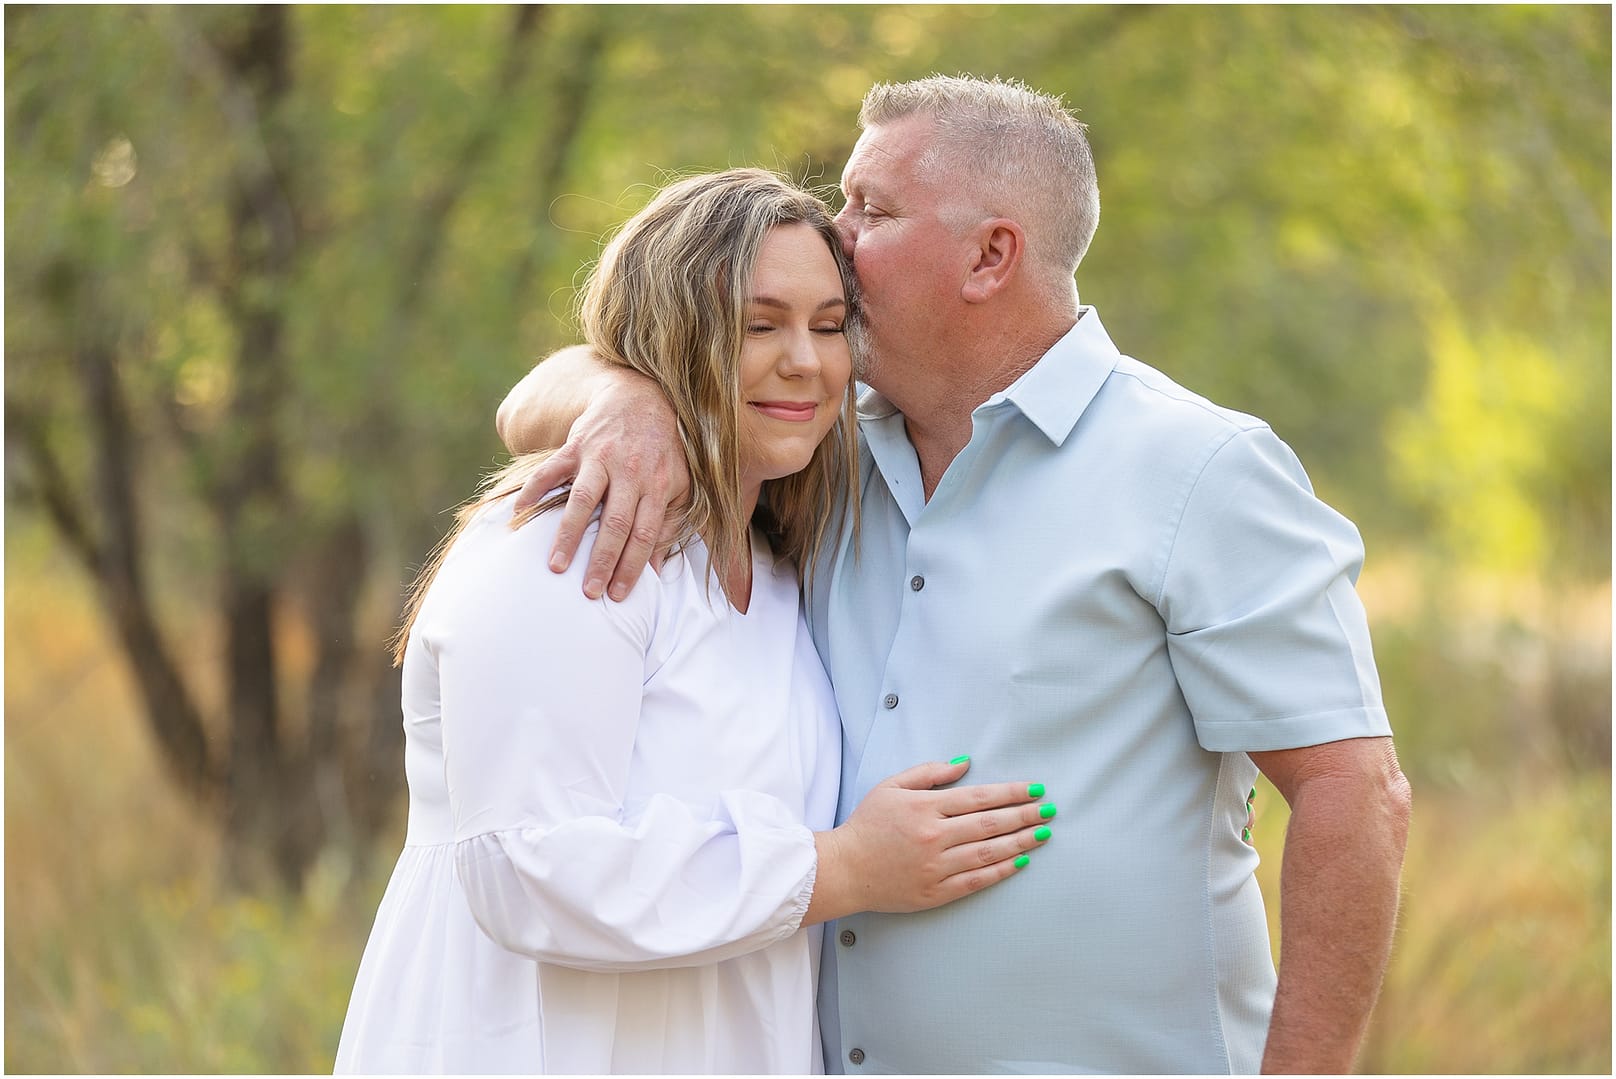 Dad embraces newly pregnant daughter. Photo by Tiffany Hix Photography.